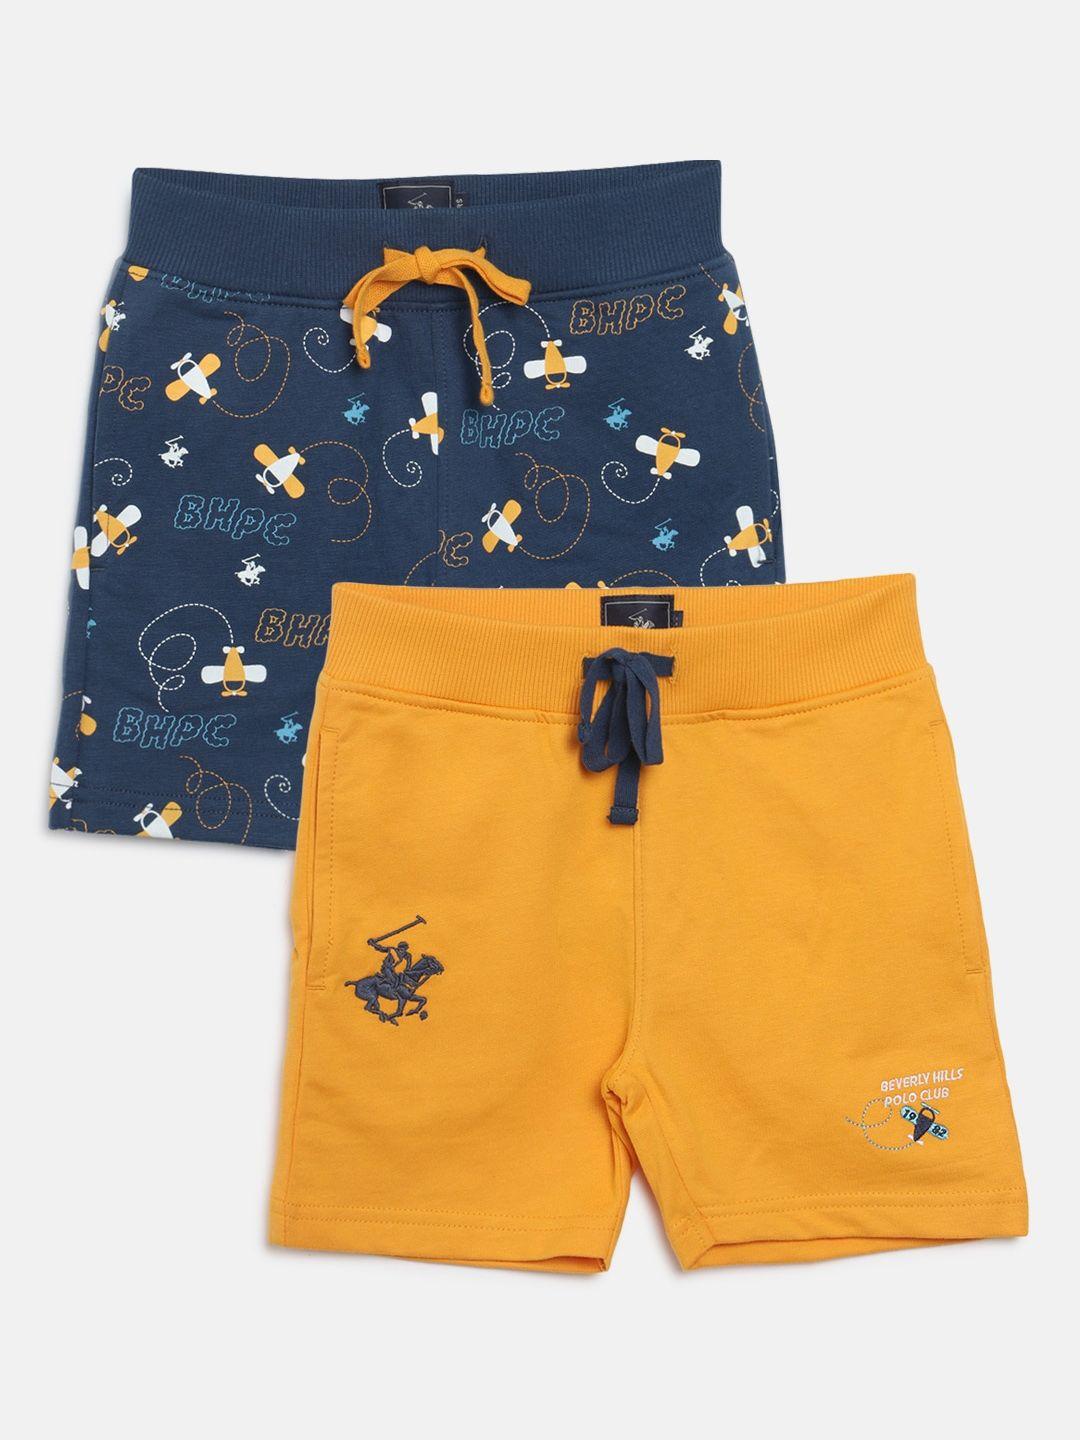 beverly hills polo club boys pack of 2 pure cotton shorts